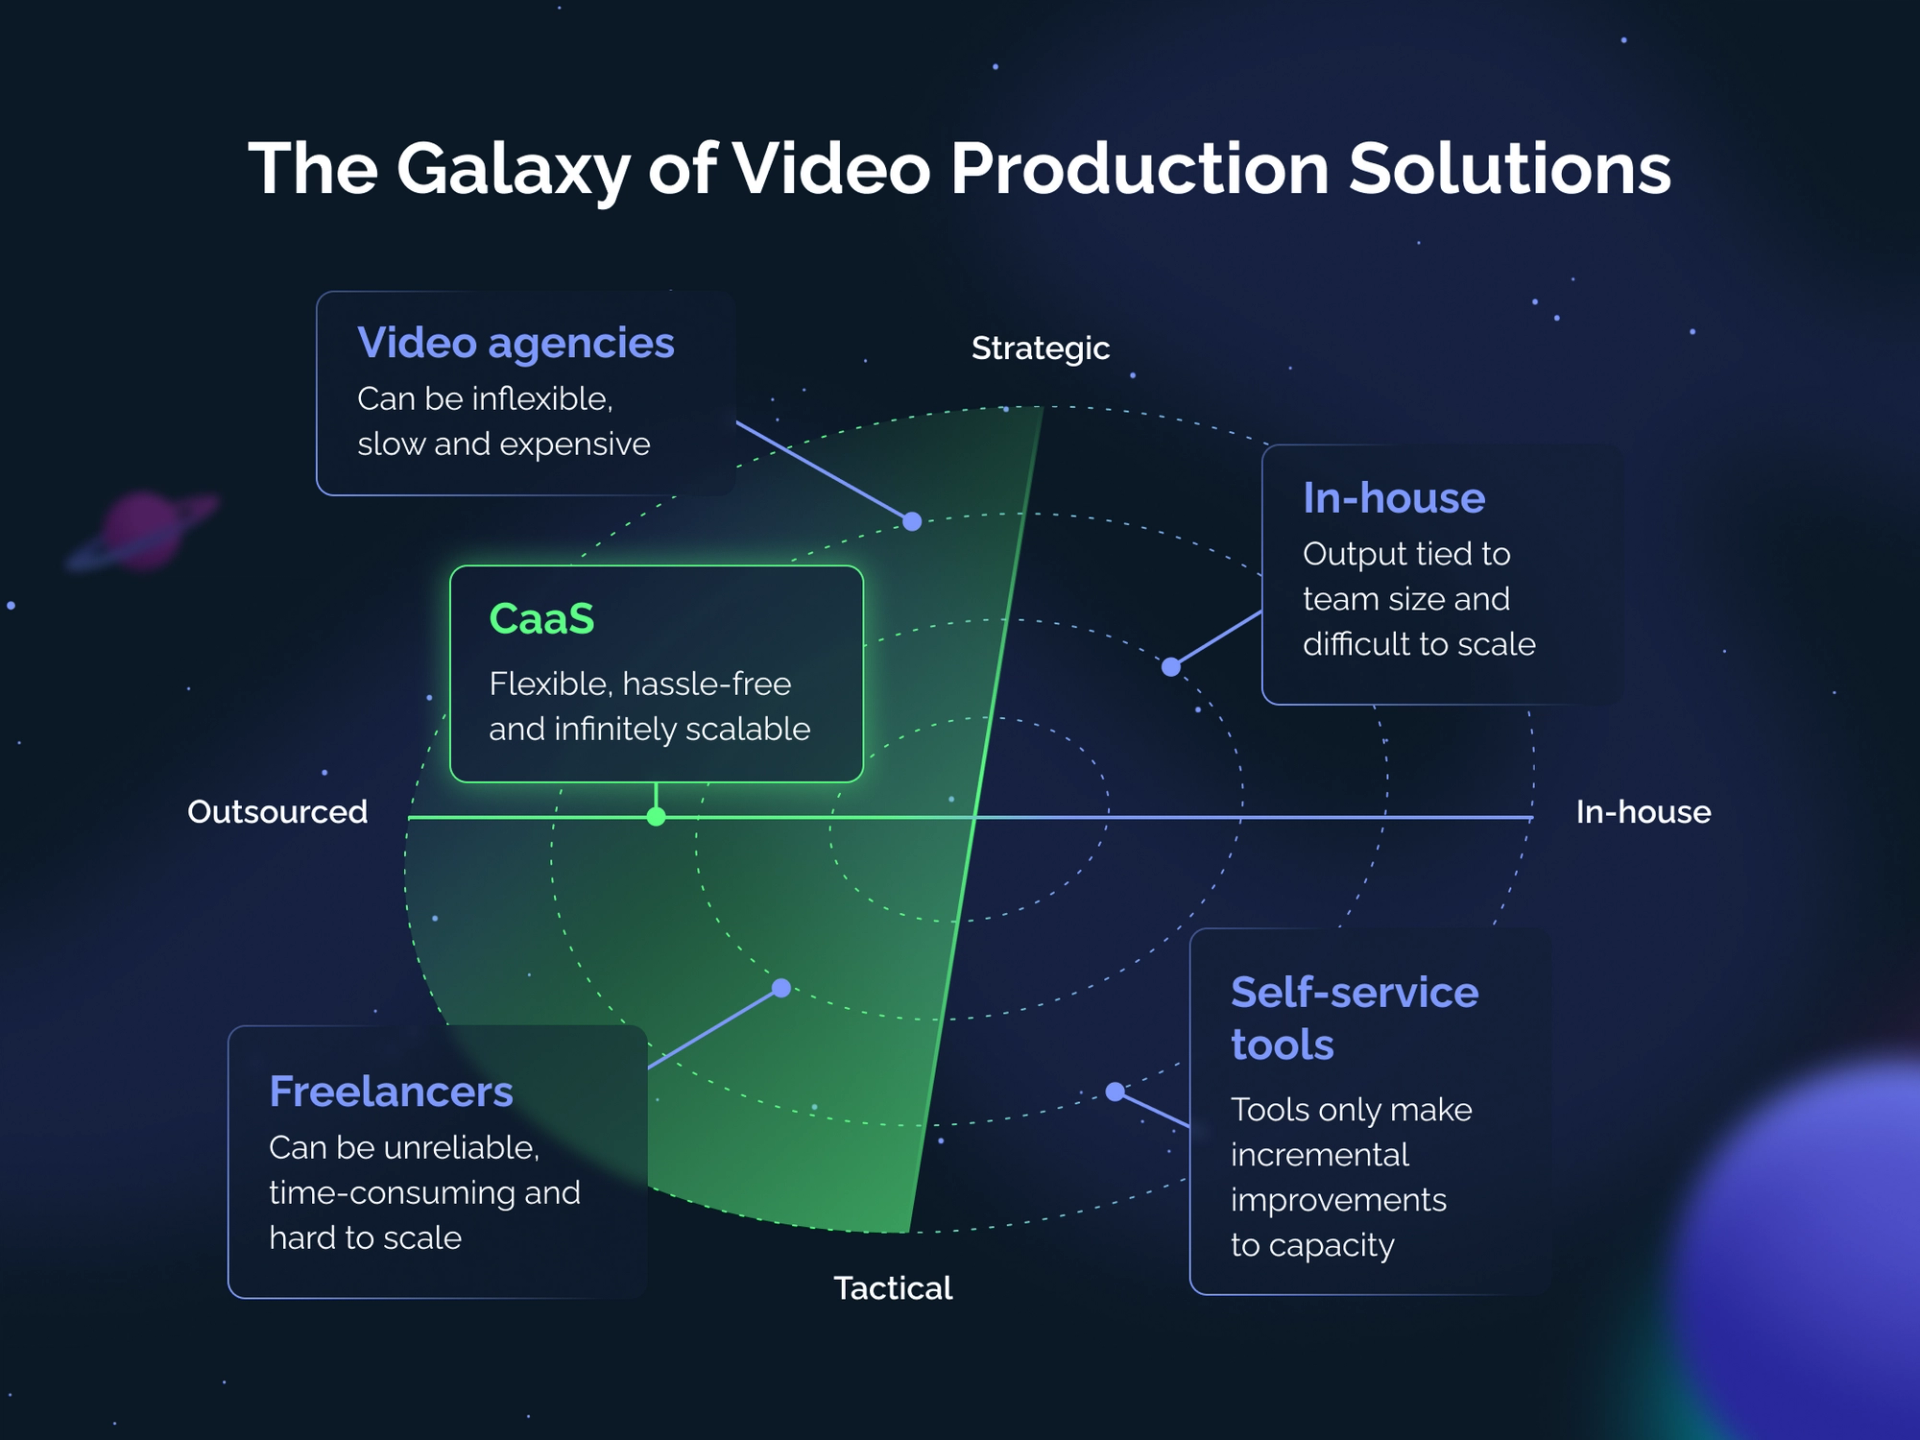 The Galaxy of Video Production Solutions: In-house, self-service tools, freelancers, CaaS, video agencies